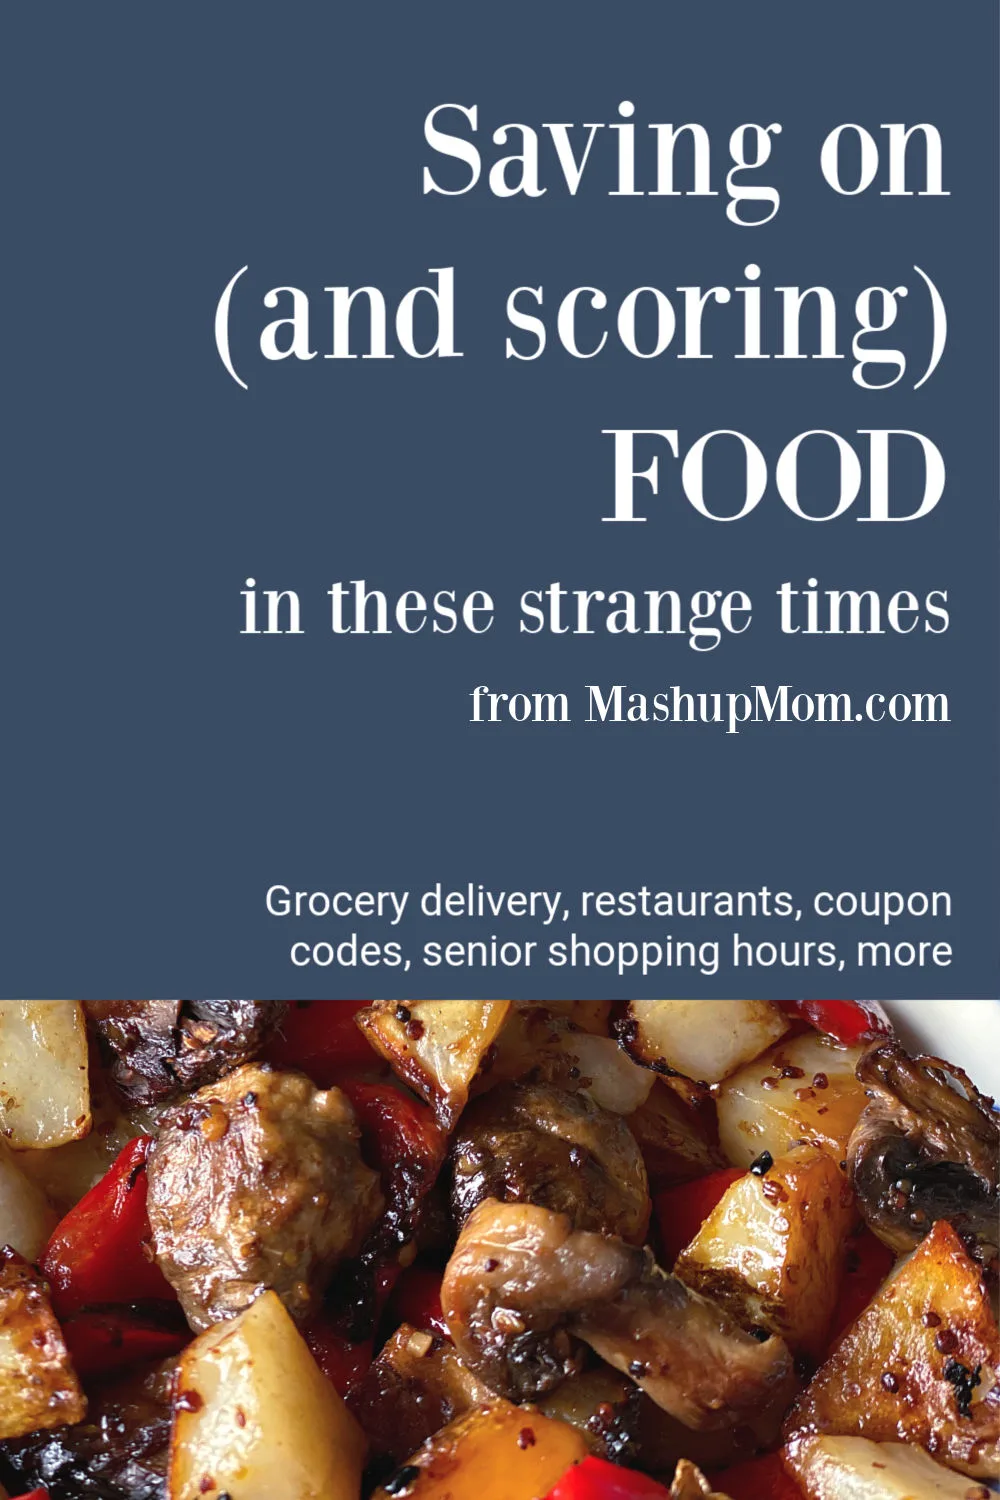 Saving on food, scoring groceries, saving on restaurant delivery, coupon codes, senior shopping hours, and more resources for strange times.